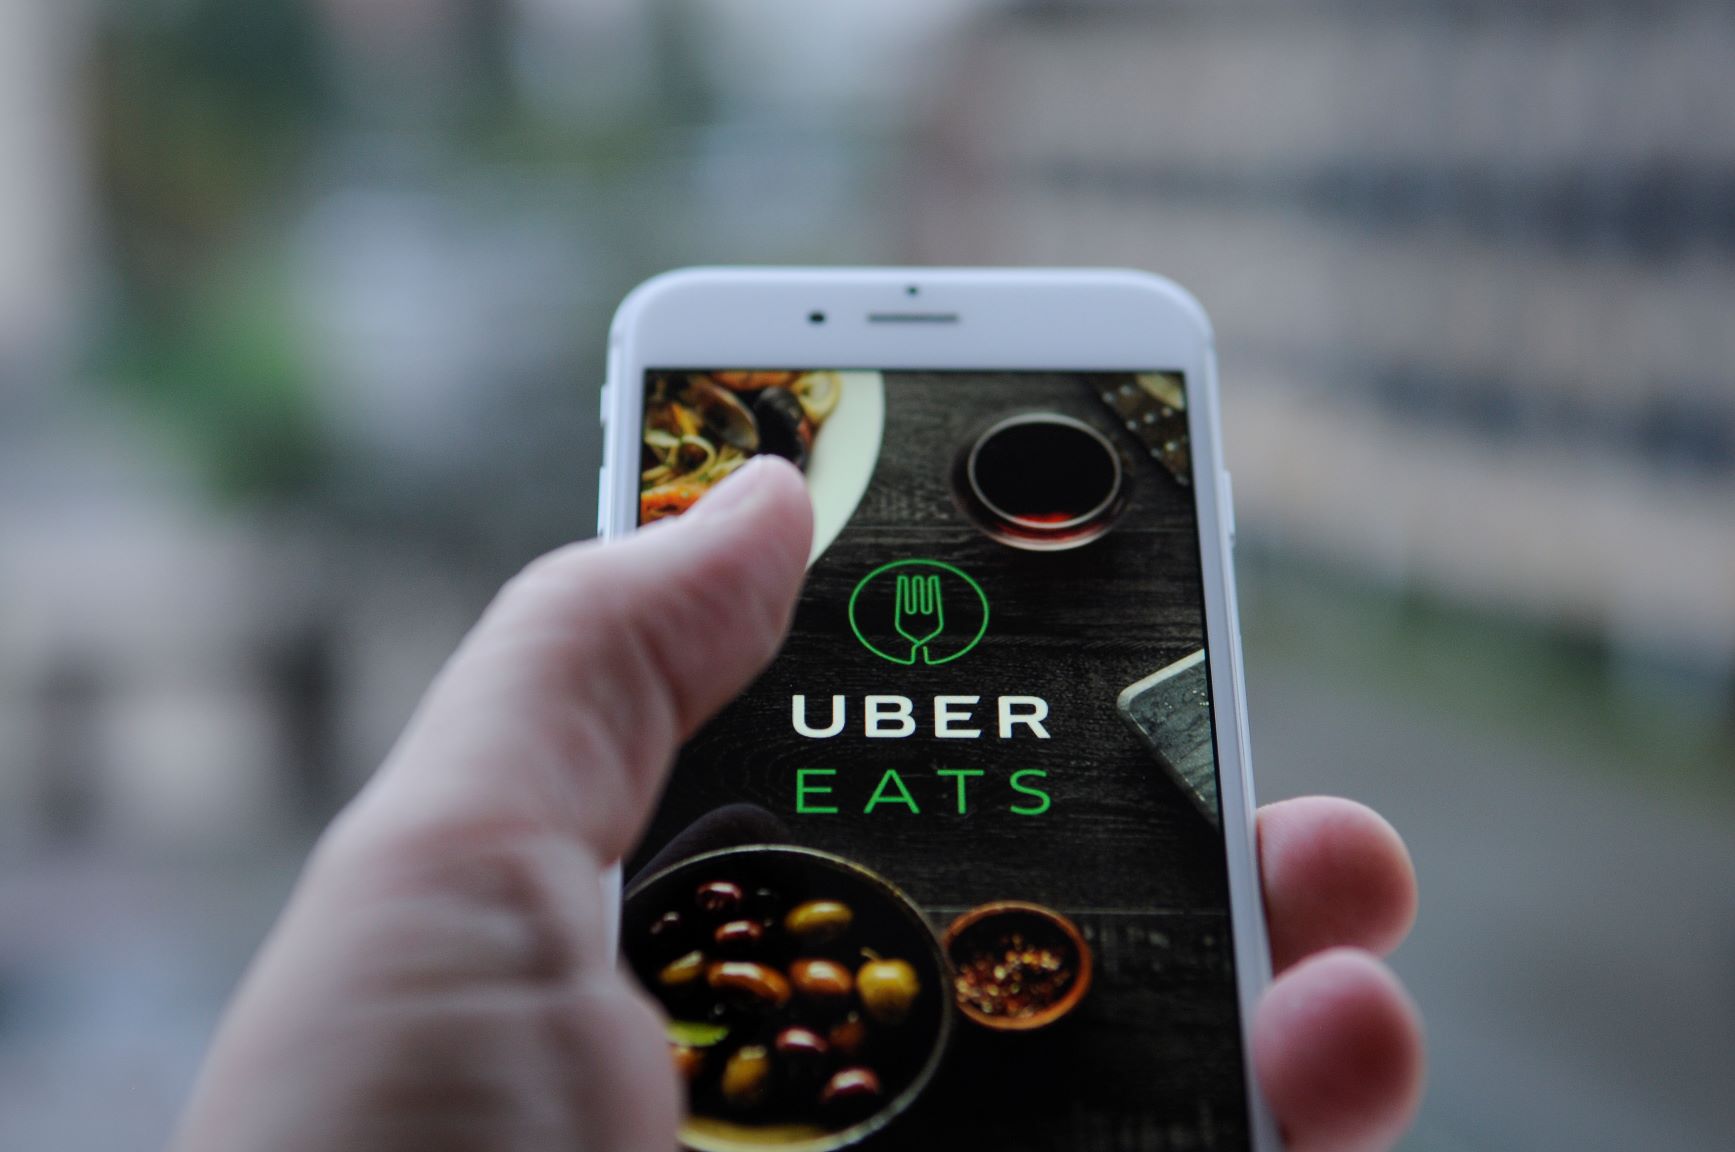 Uber is targeting a $90 billion IPO, receives $500M from PayPal